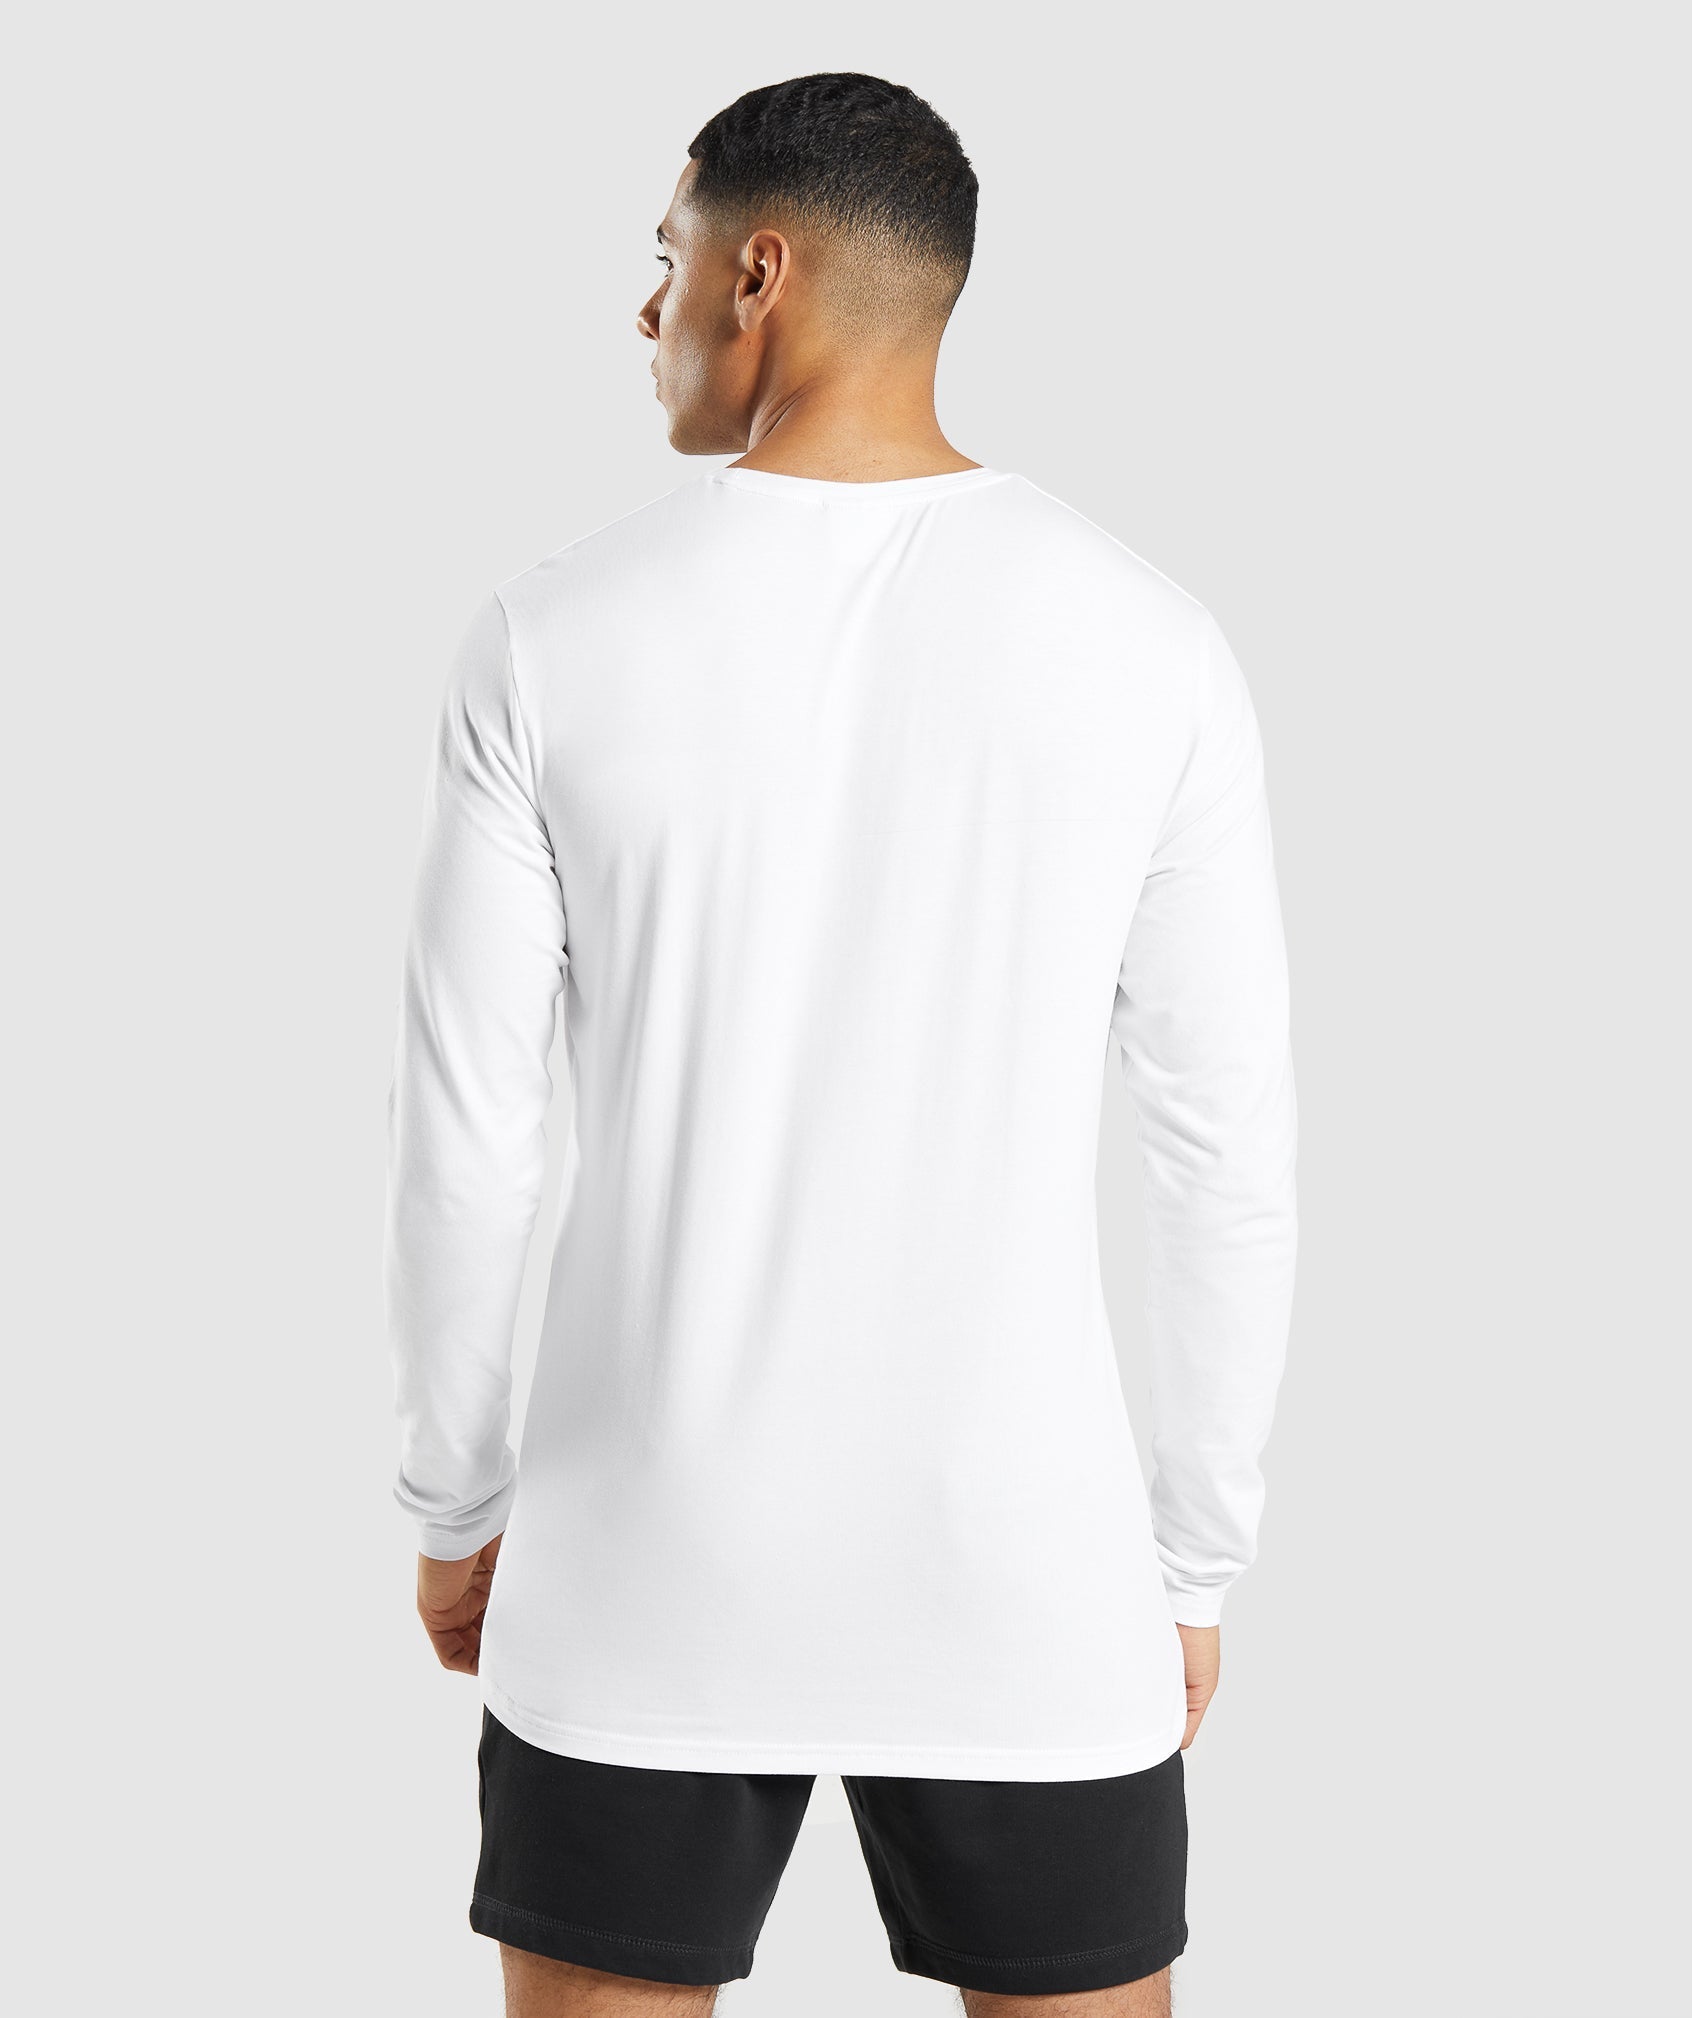 Essential Long Sleeve T-Shirt in White - view 2